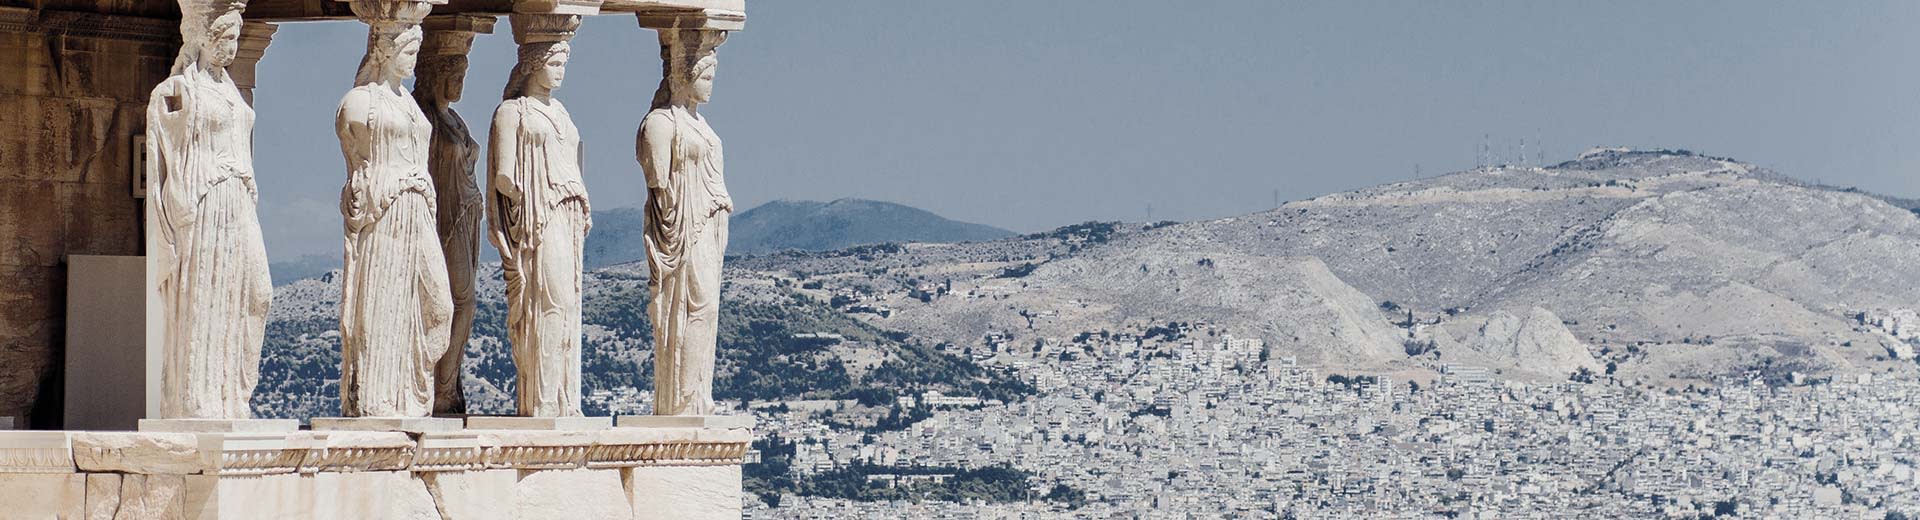 Caryatids of the Erechtheion in Athens with mountains in the background.